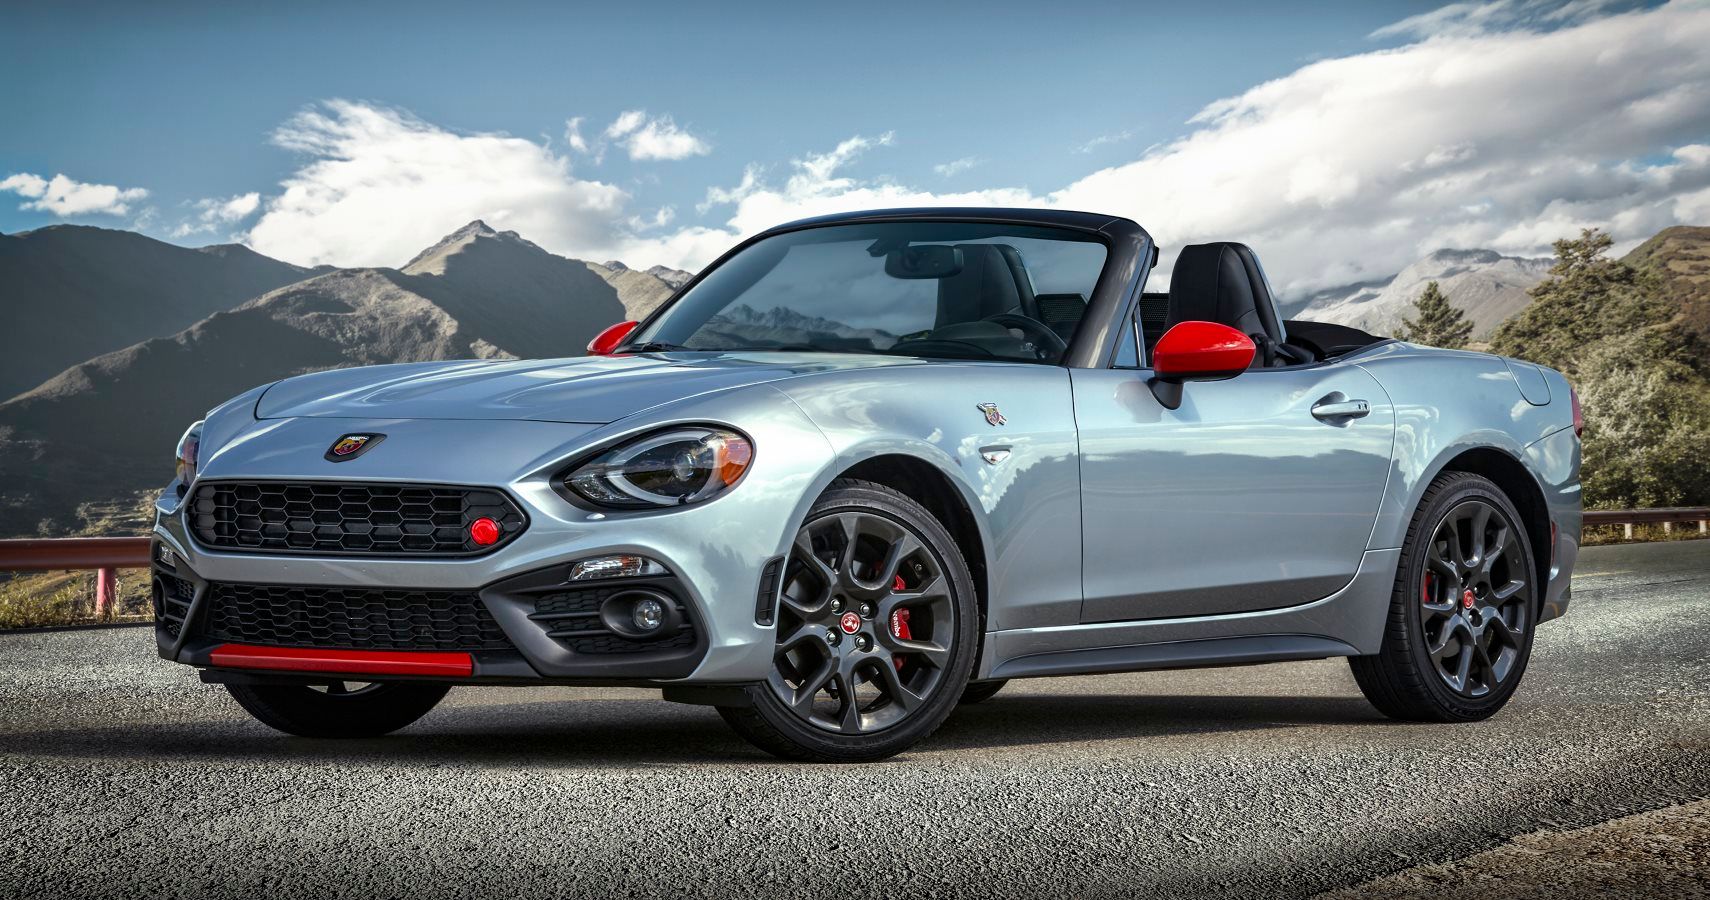 2019 Fiat 124 Spider Abarth Sounds Like A Beast